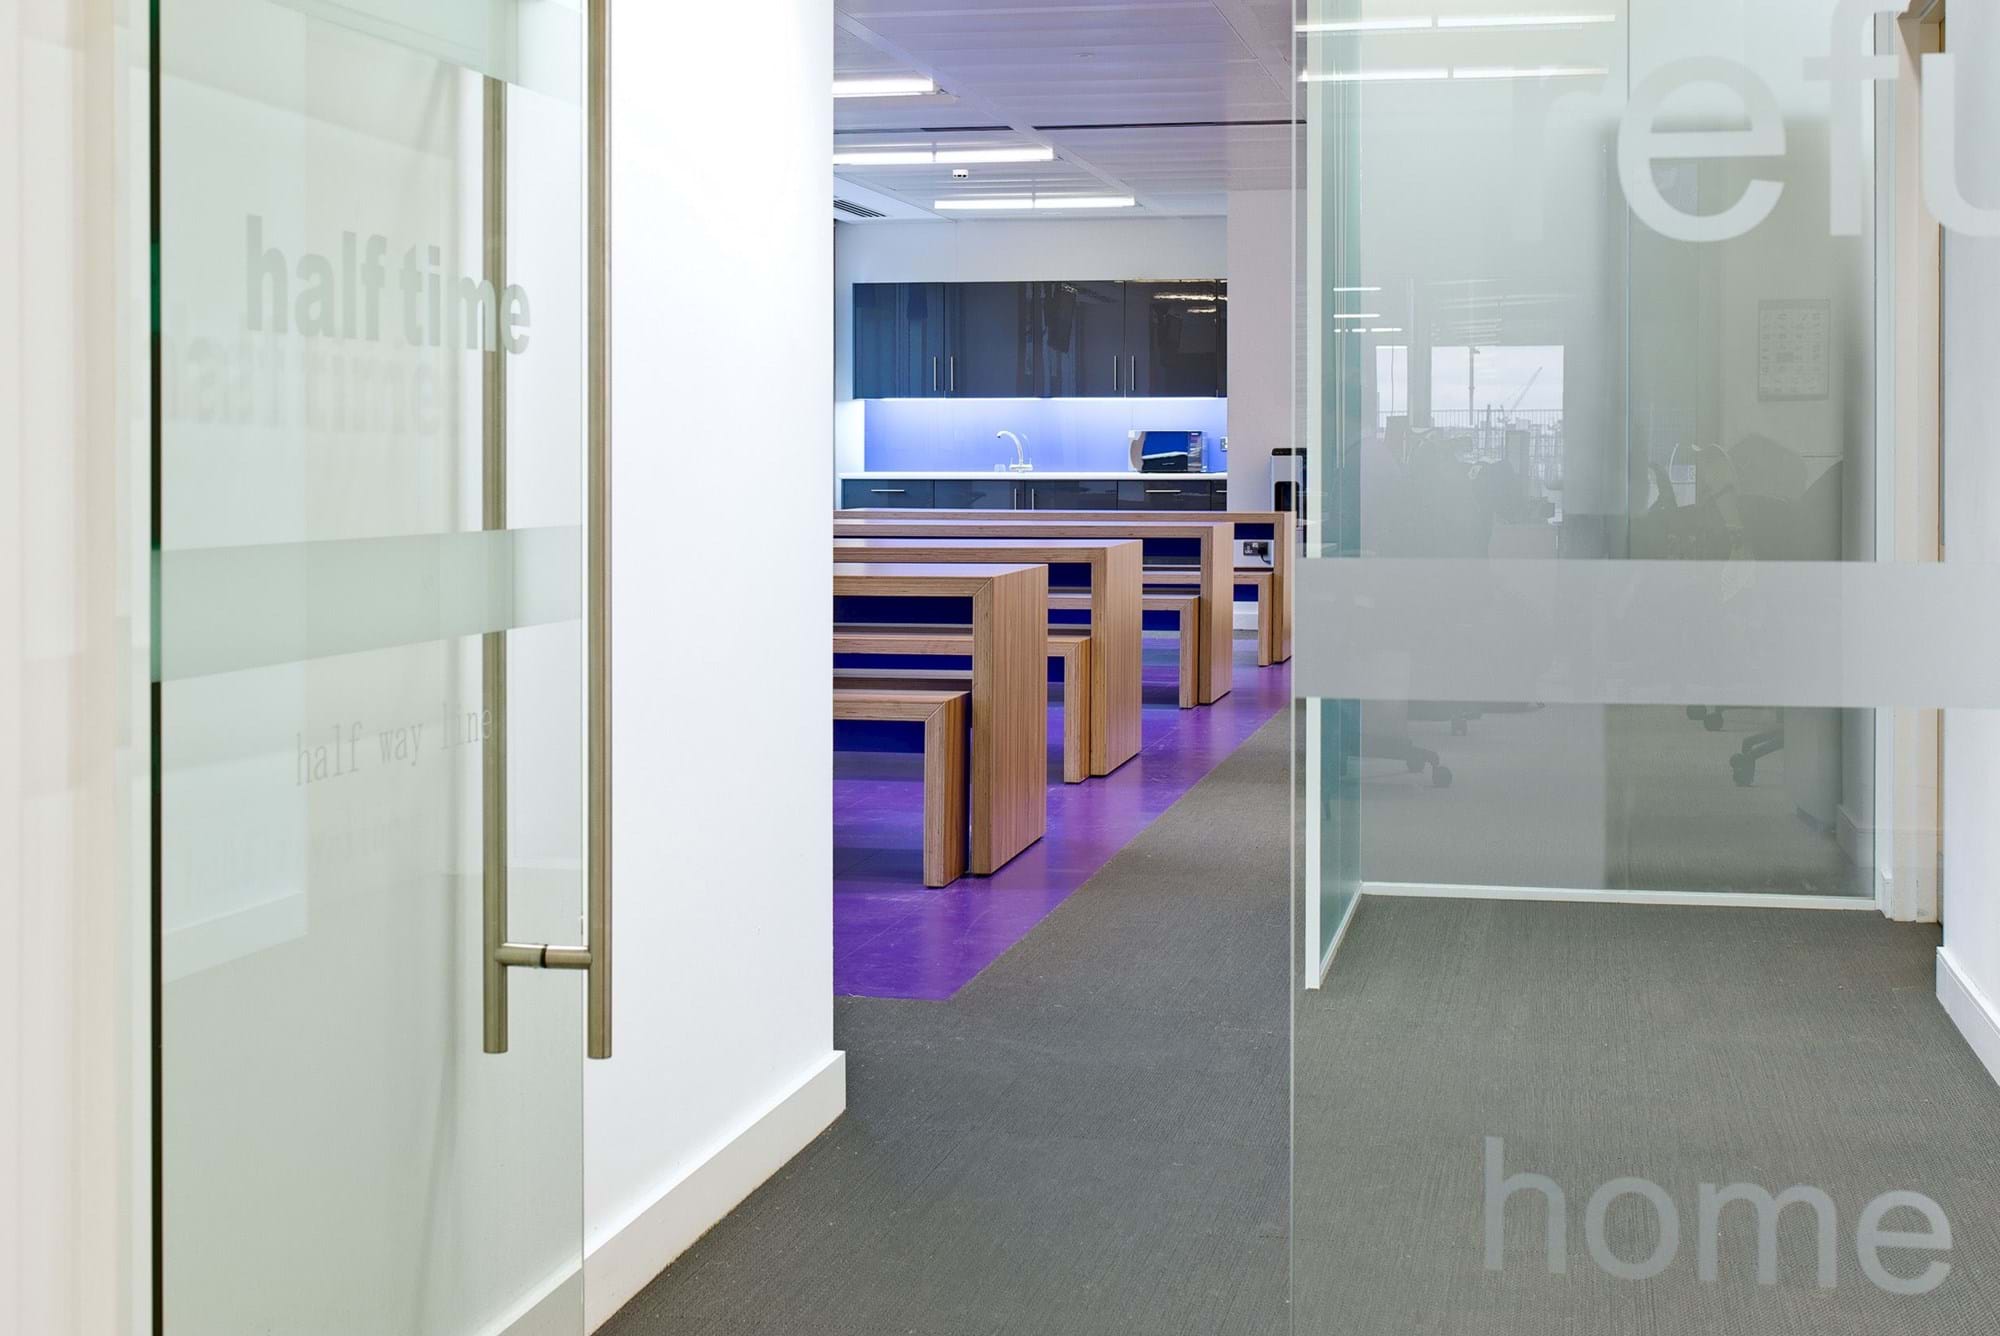 Modus Workspace office design, fit out and refurbishment - Fast Track - Teapoint - Fast_Track04_highres_jpg_sRGB.jpg